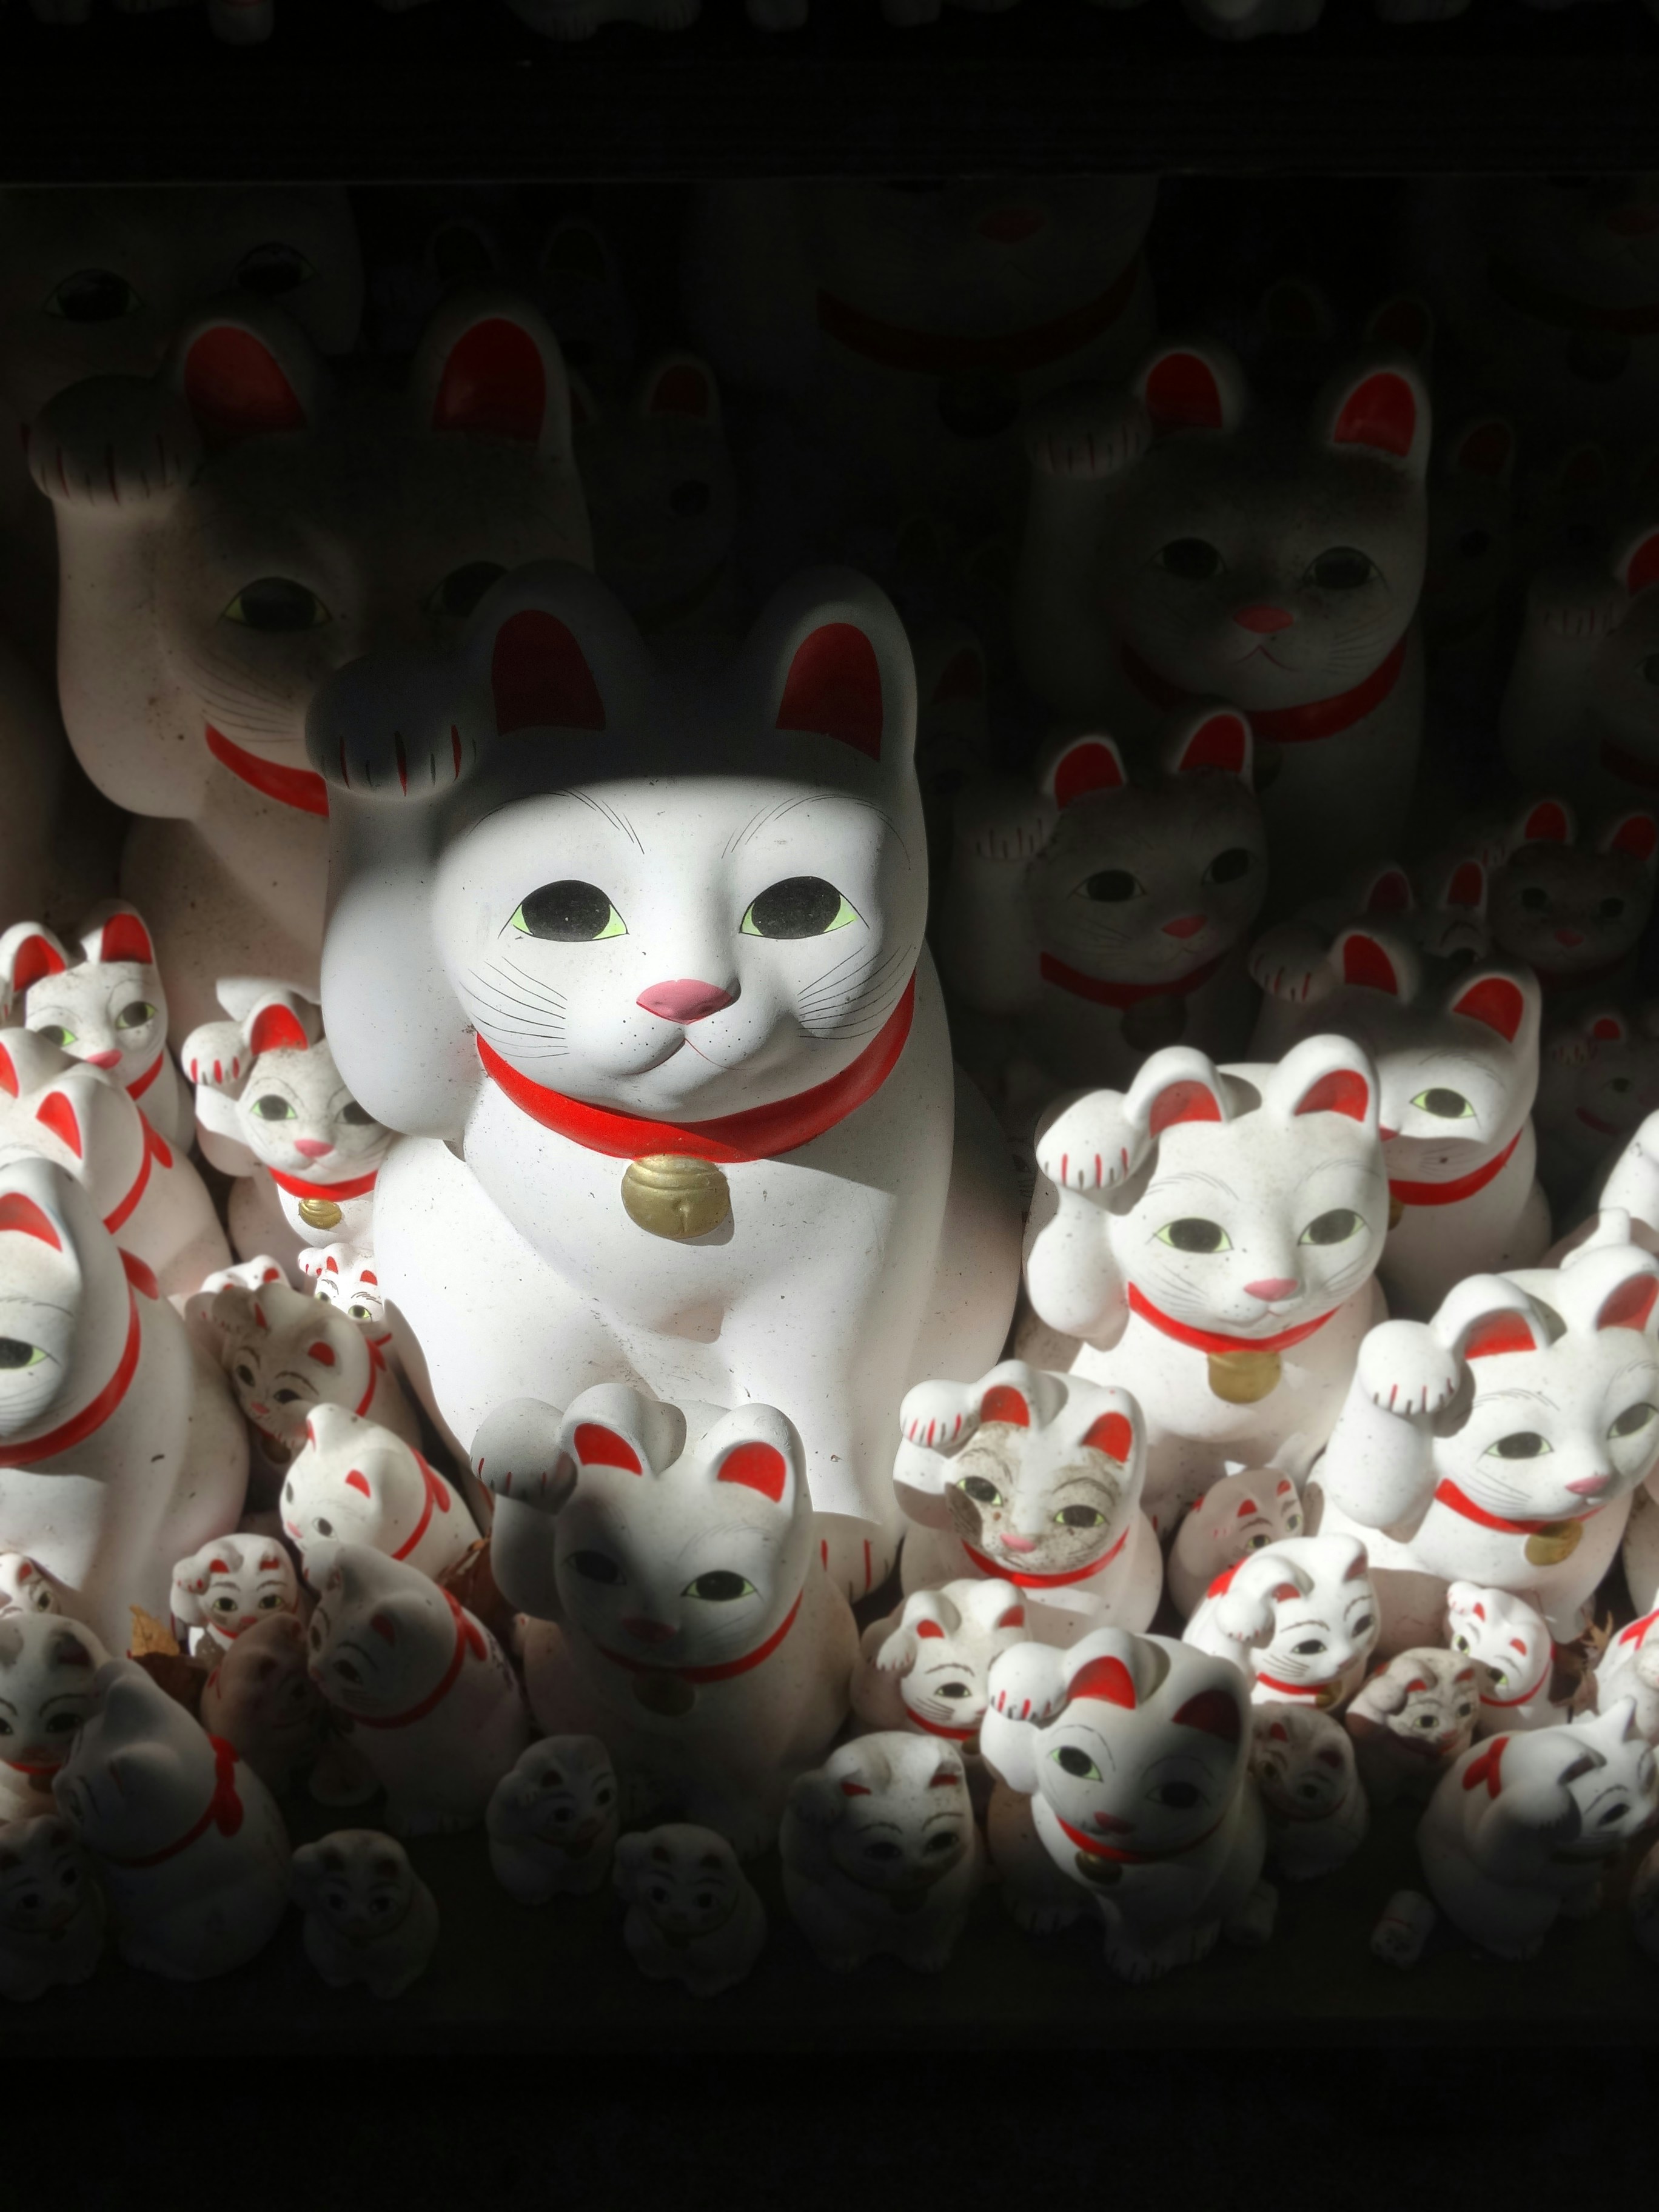 The fortune cats at Gotokuji Temple, Tokyo. The story said that once upon a time in Japan, a cat brought good fortune to the temple and the poor monk, who always take care of the cat.